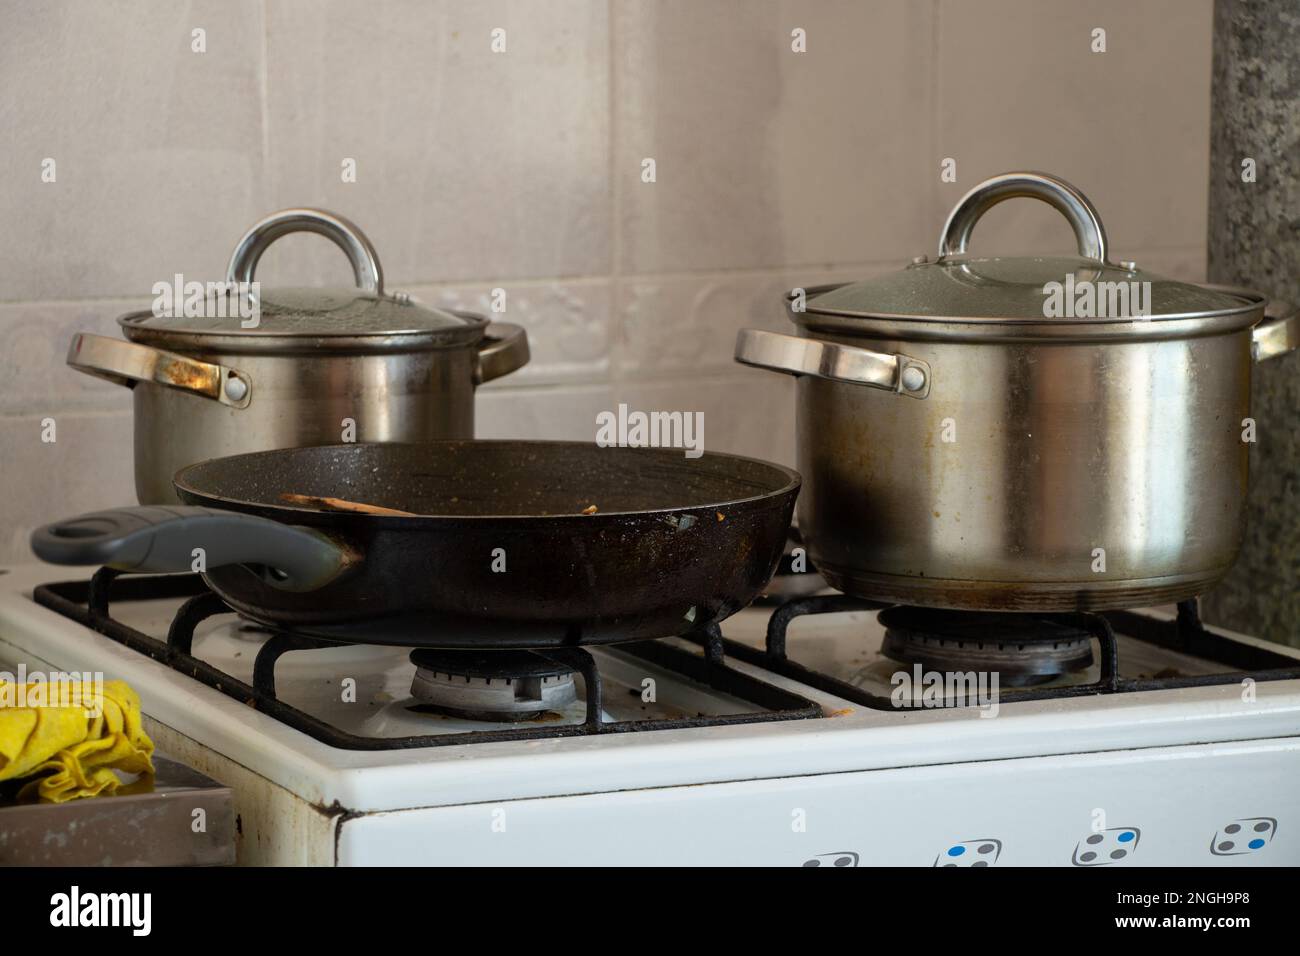 pots are on the gas stove in the kitchen at home, cook on the stove Stock Photo